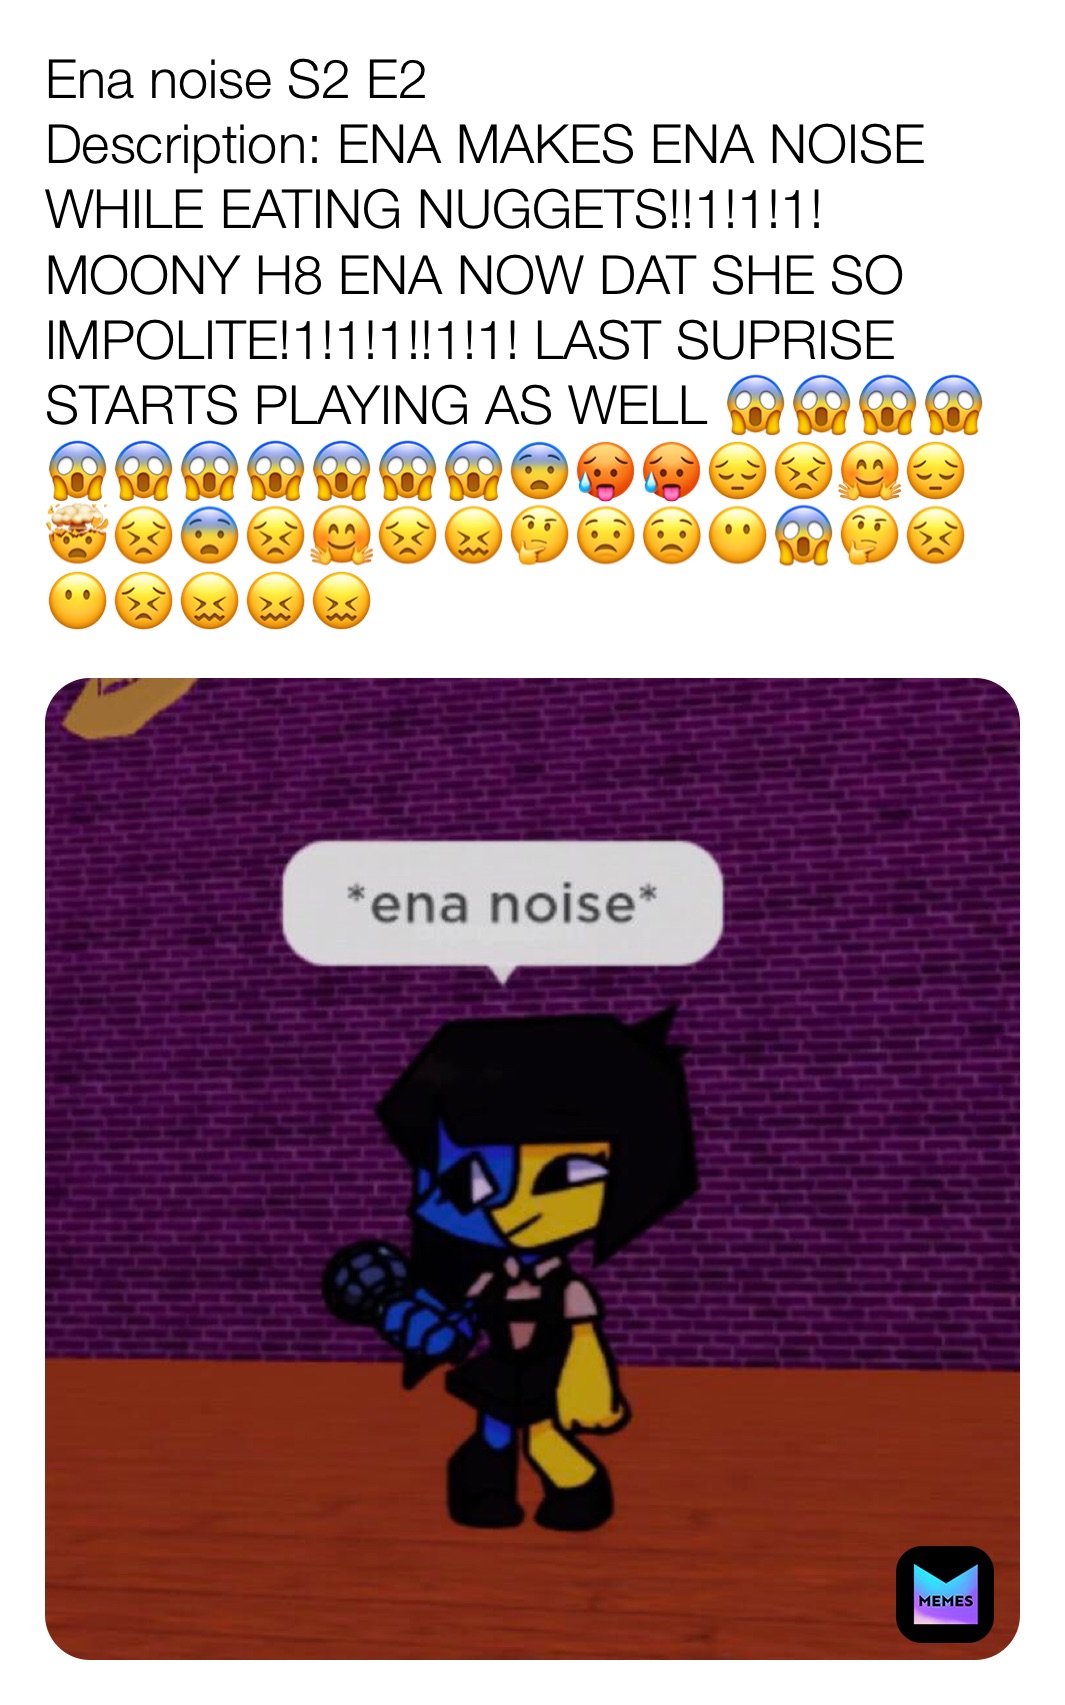 Ena noise S2 E2
Description: ENA MAKES ENA NOISE WHILE EATING NUGGETS!!1!1!1! MOONY H8 ENA NOW DAT SHE SO IMPOLITE!1!1!1!!1!1! LAST SUPRISE STARTS PLAYING AS WELL 😱😱😱😱😱😱😱😱😱😱😱😨🥵🥵😔😣🤗😔🤯😣😨😣🤗😣😖🤔😟😟😶😱🤔😣😶😣😖😖😖